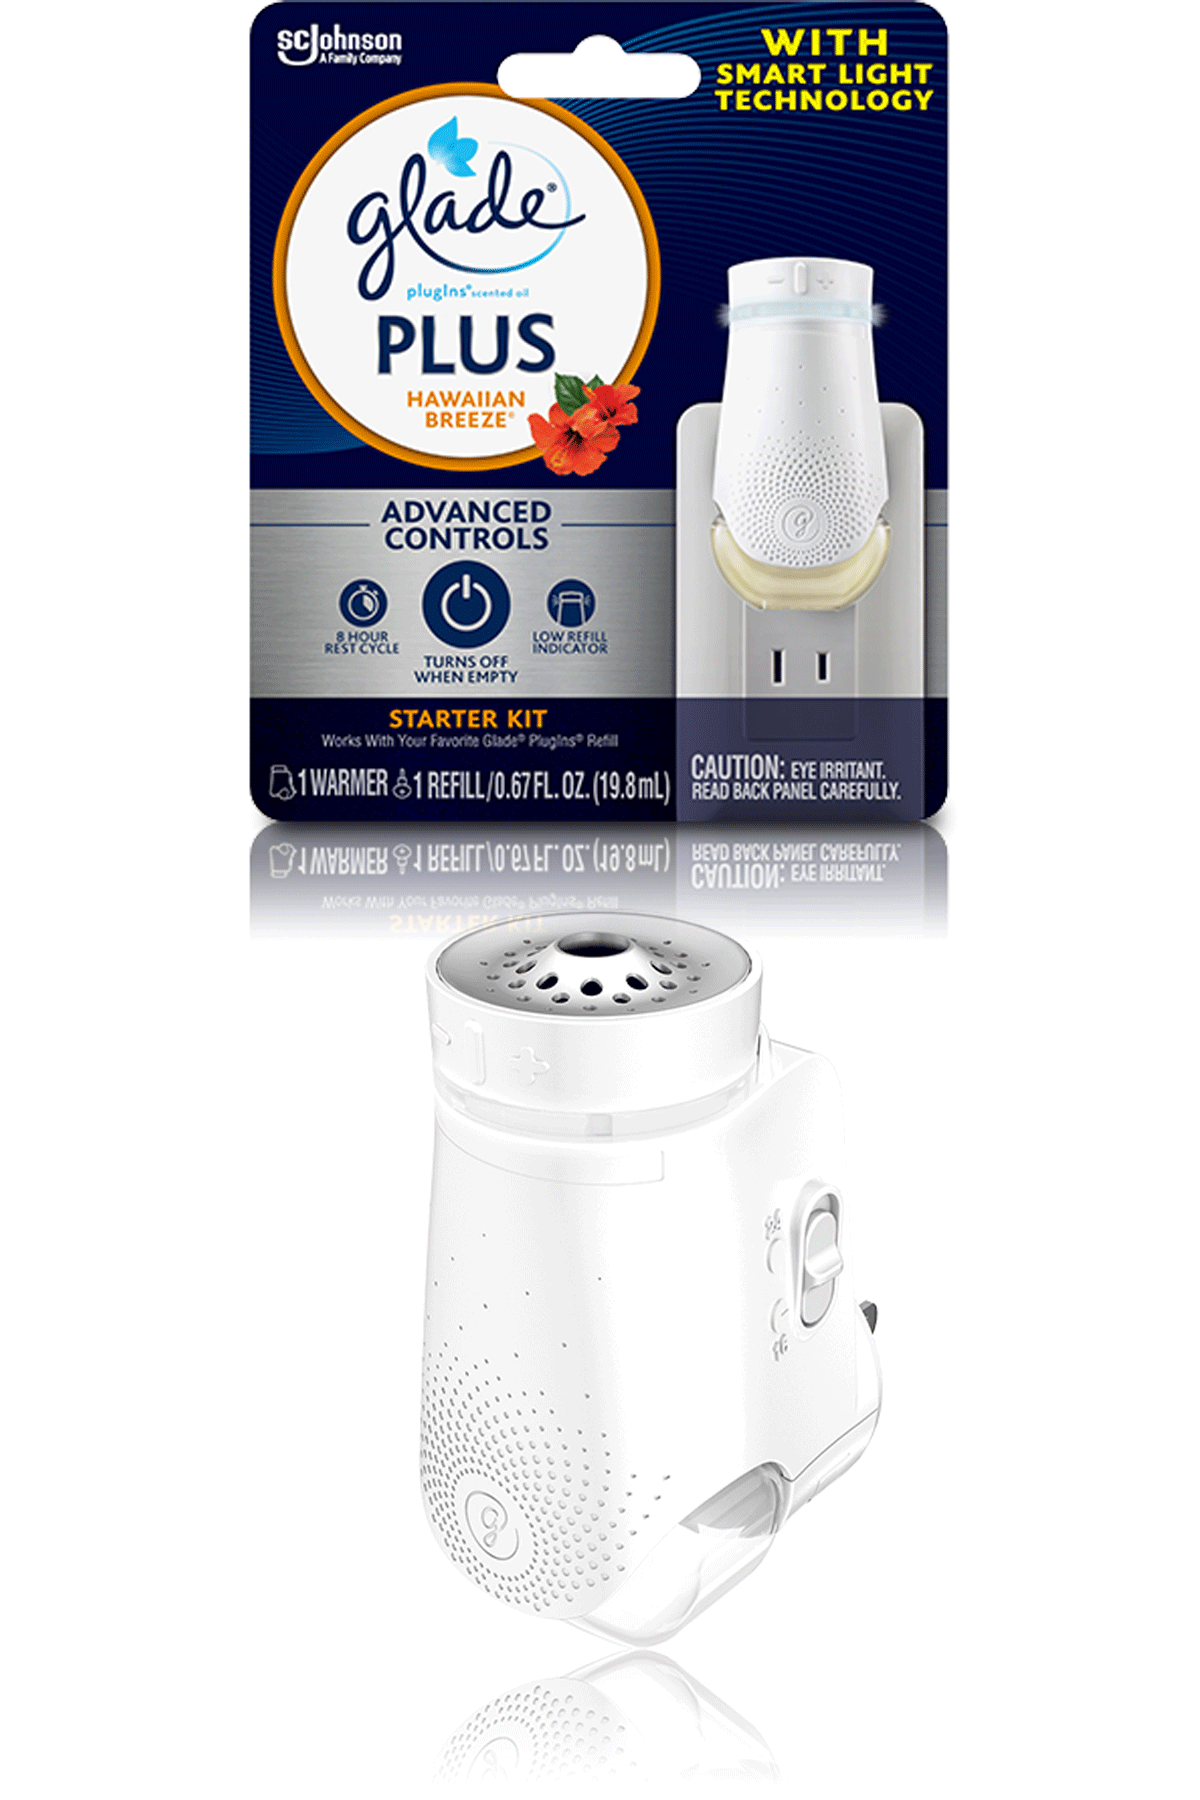 Designed with innovative new features that are smart and intuitive, PlugIns® PLUS allow you to enjoy your favorite fragrance while saving every scent.